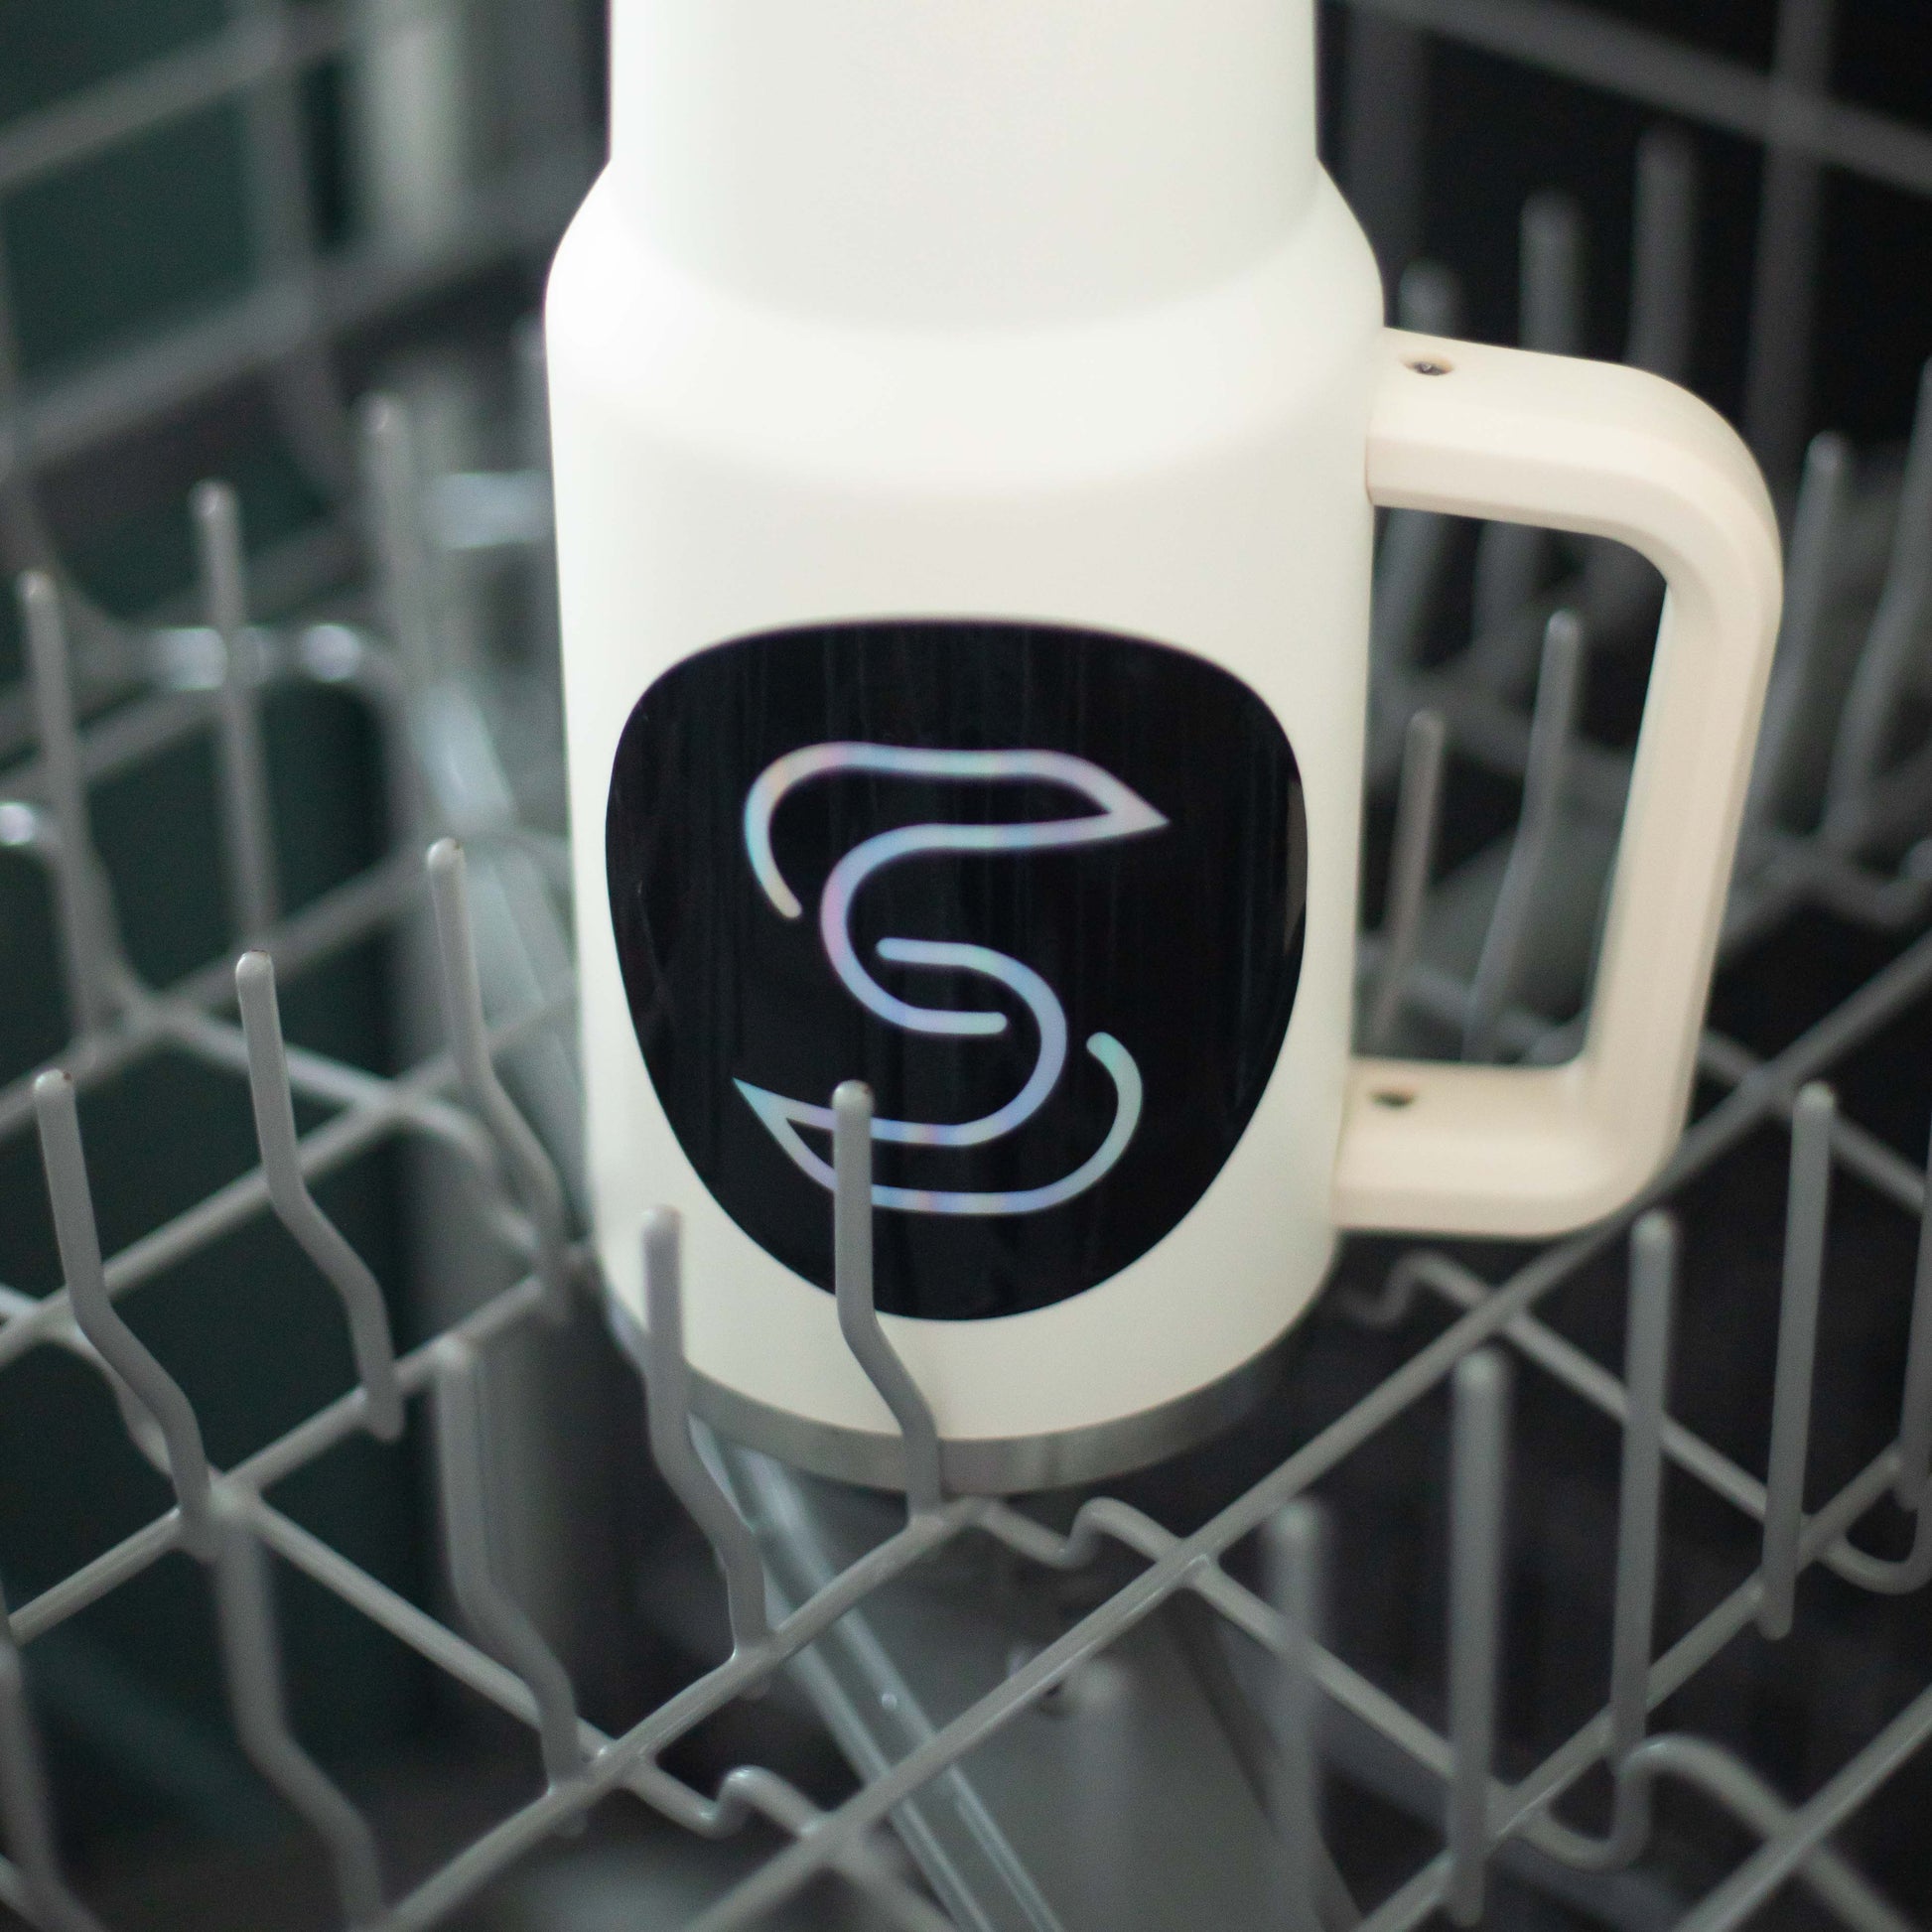 A holographic sticker of the Stickr logo on a water bottle in a dishwasher